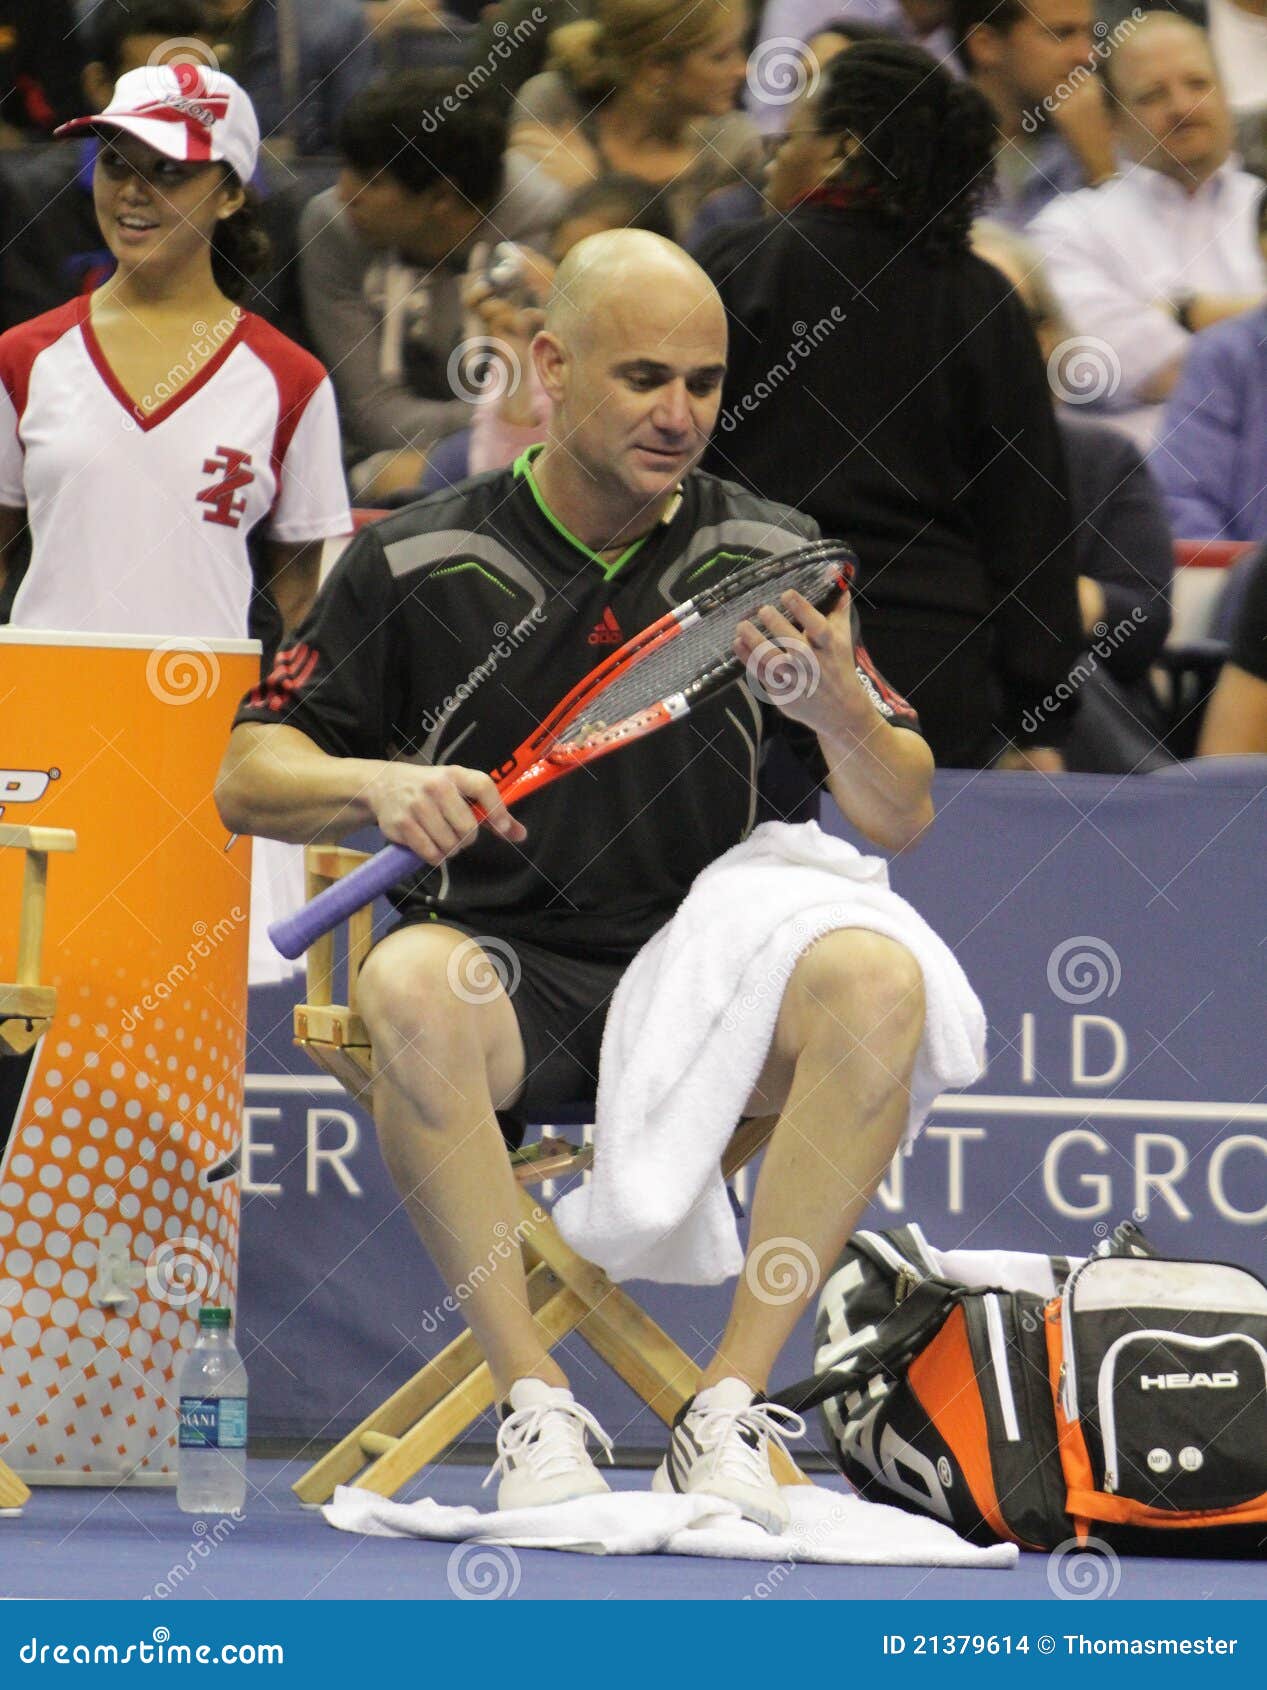 Andre Agassi - Tennis Legends on the Court 2011 Editorial Stock Image